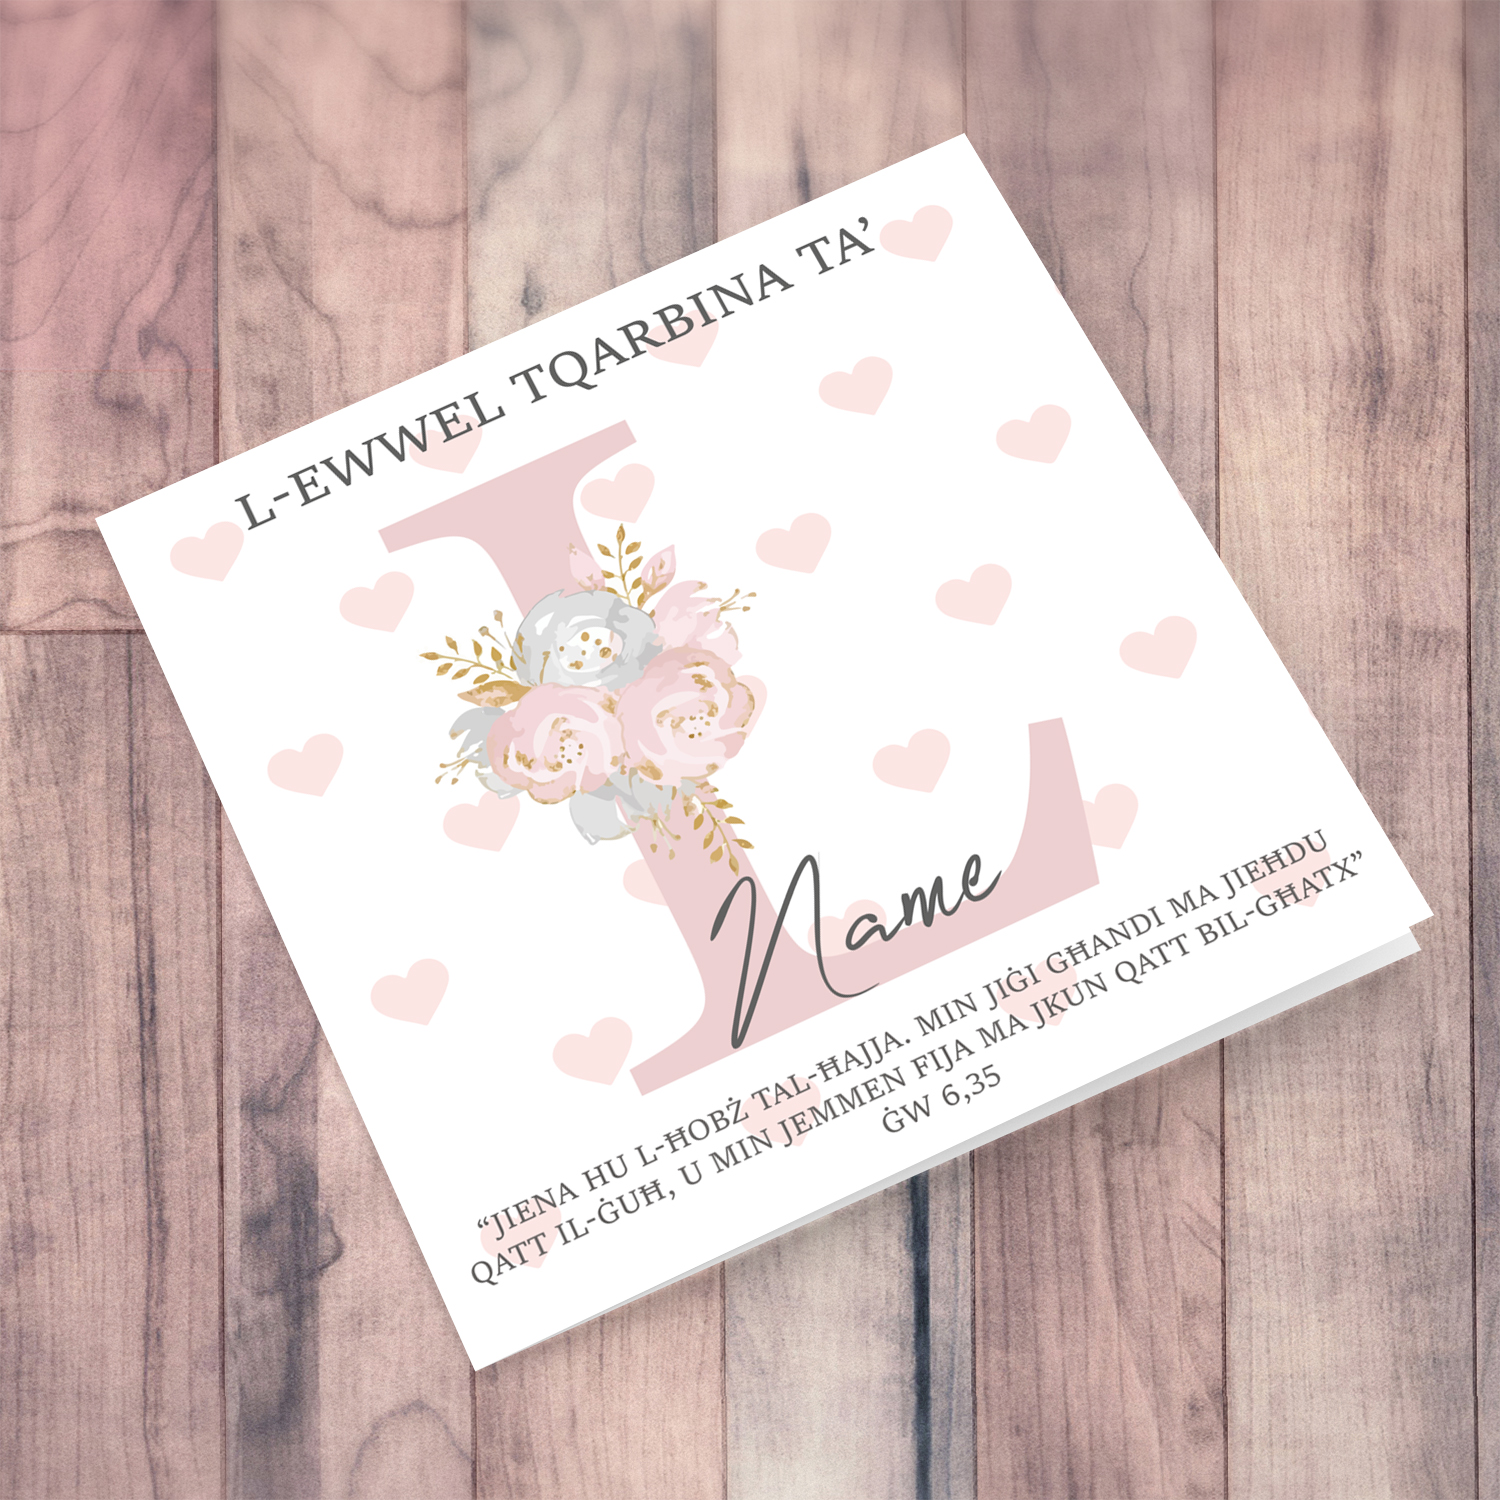 L - Initial First Holy Communion Card for Girls, with bible verse ĠW 6,35  and light pink heart background in Maltese | Witty Creations